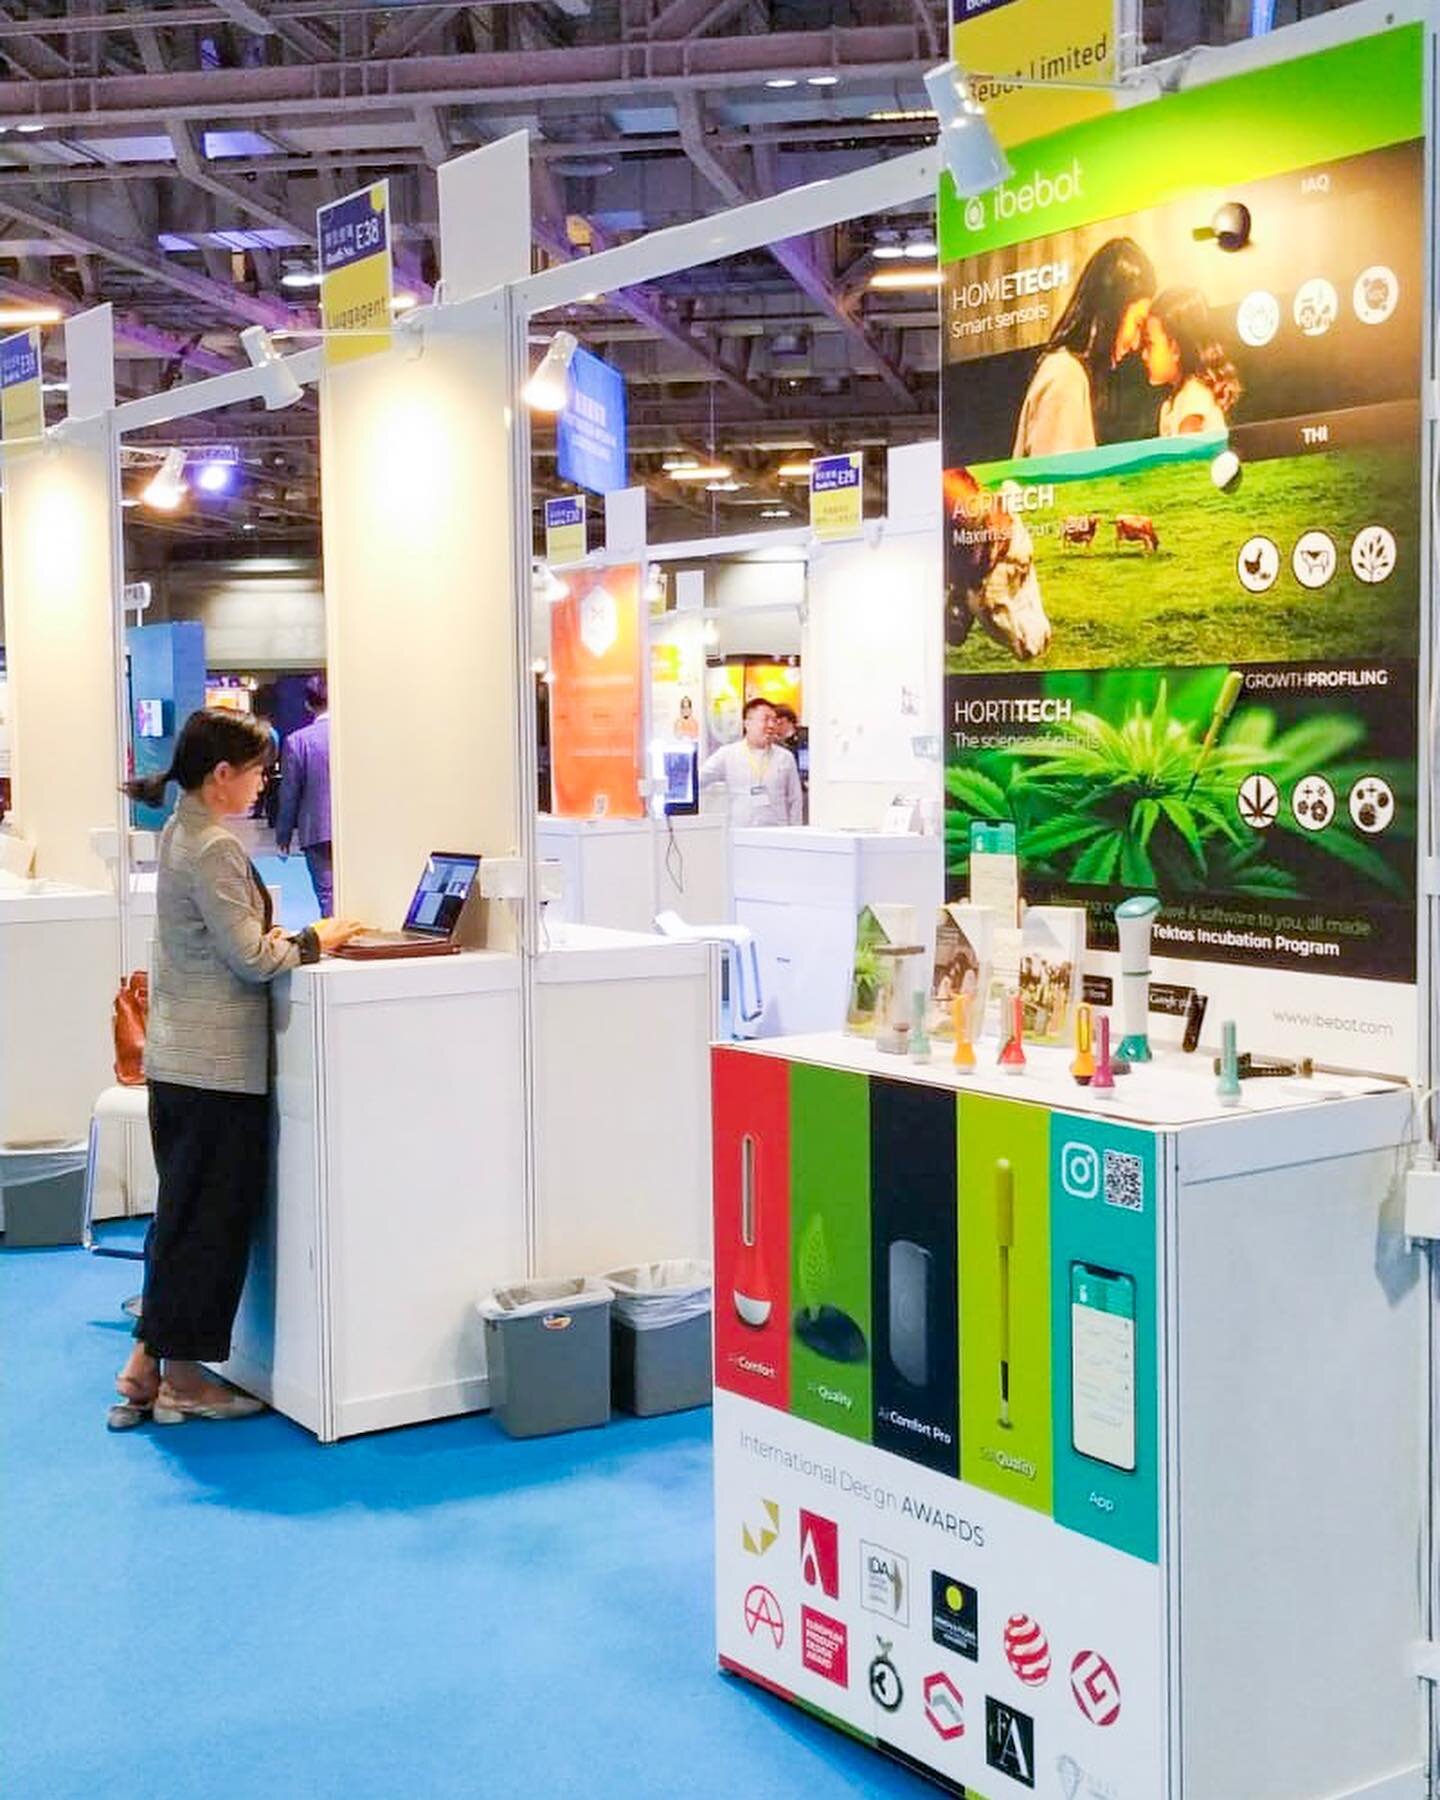 Check @ibebot_hk booth E37!
See the latest products that they offer 🌱🌡😎
#iot 
#smartsensors 
#macau
#misweek
#cotai 
#aircomfort 
#smartsolutions